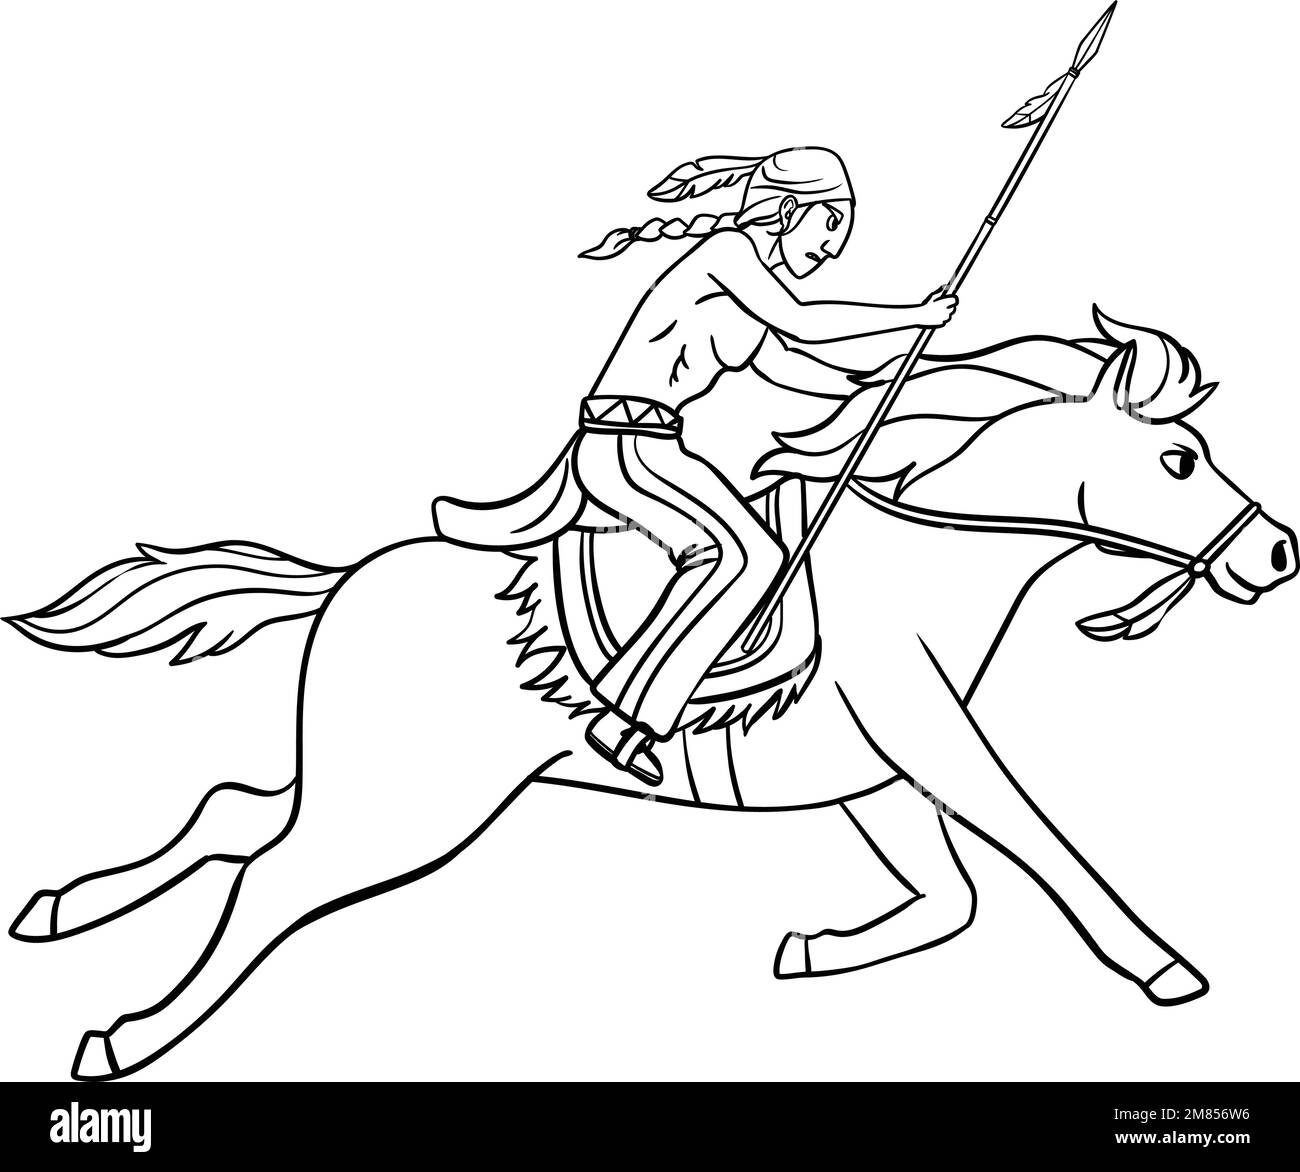 Native American Indian Riding a Horse Isolated Stock Vector